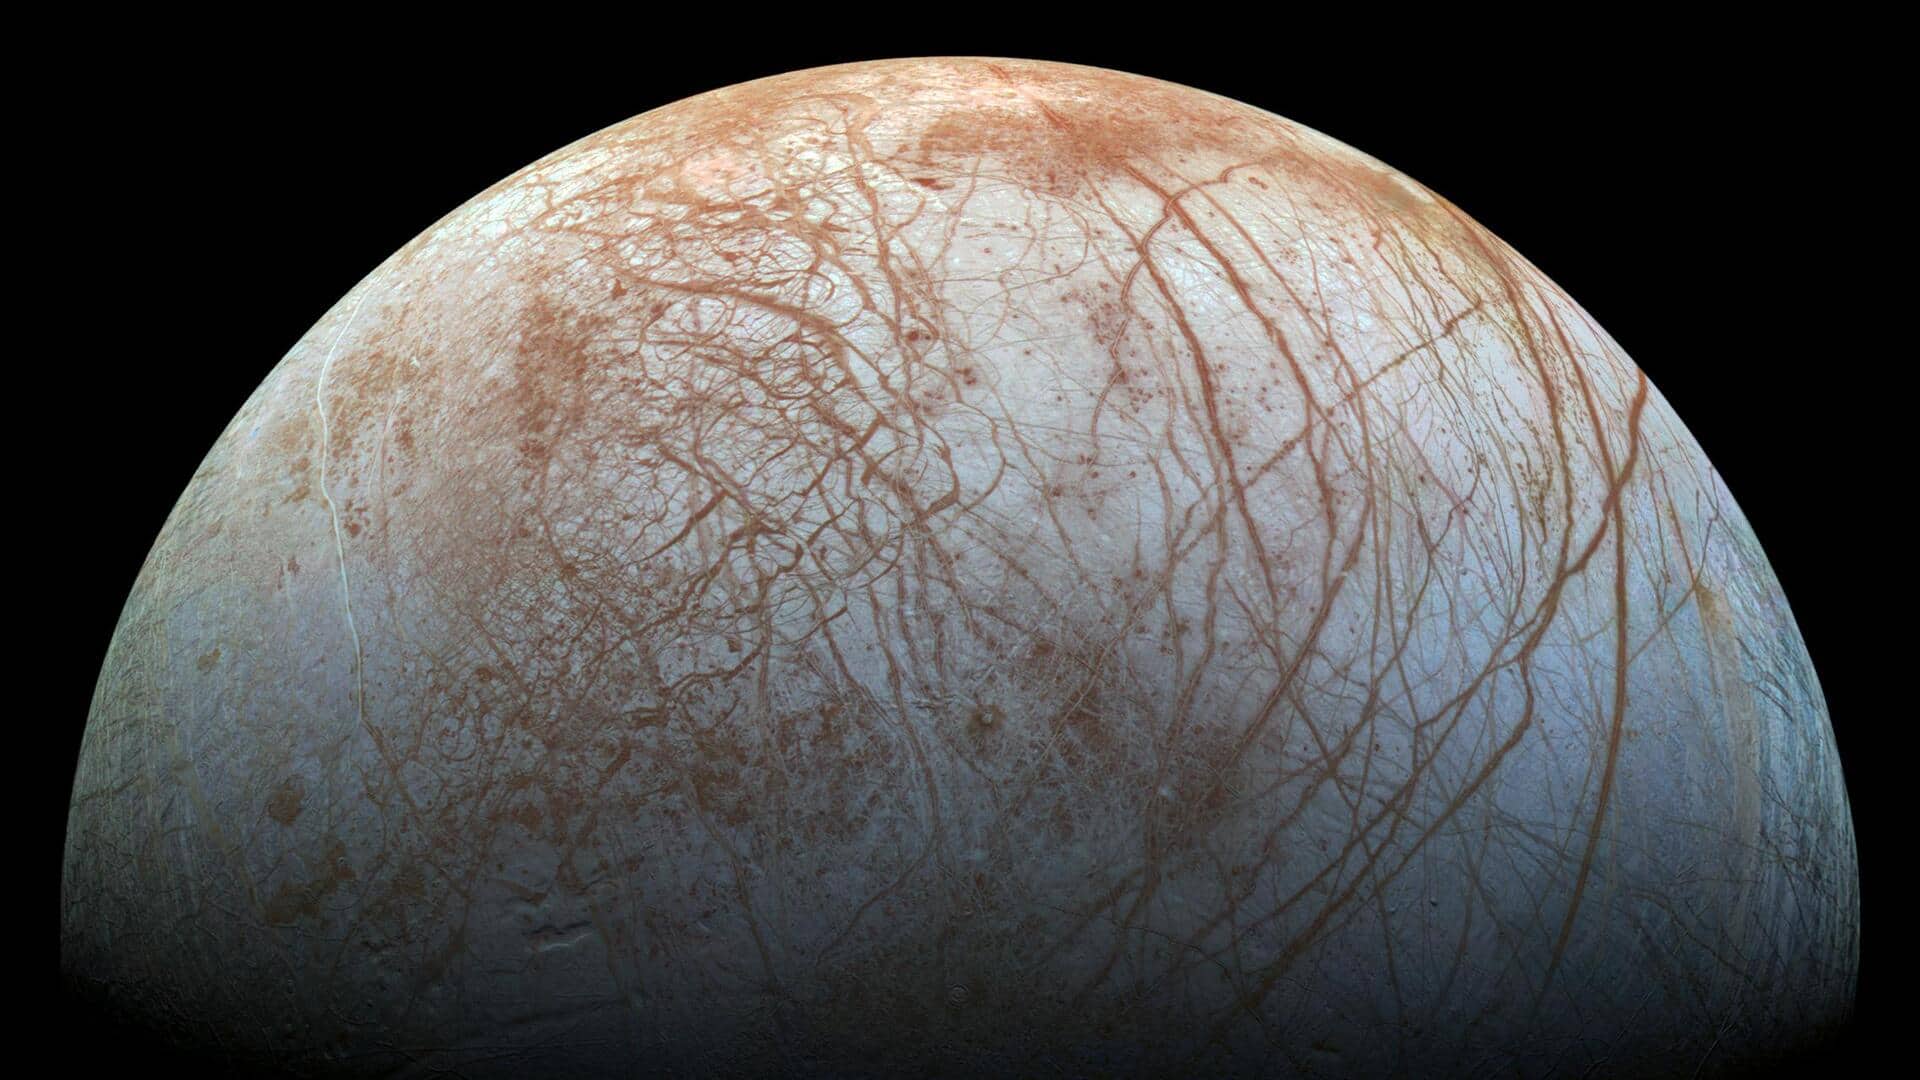 JWST finds carbon dioxide on Europa, fuels possibilities of life